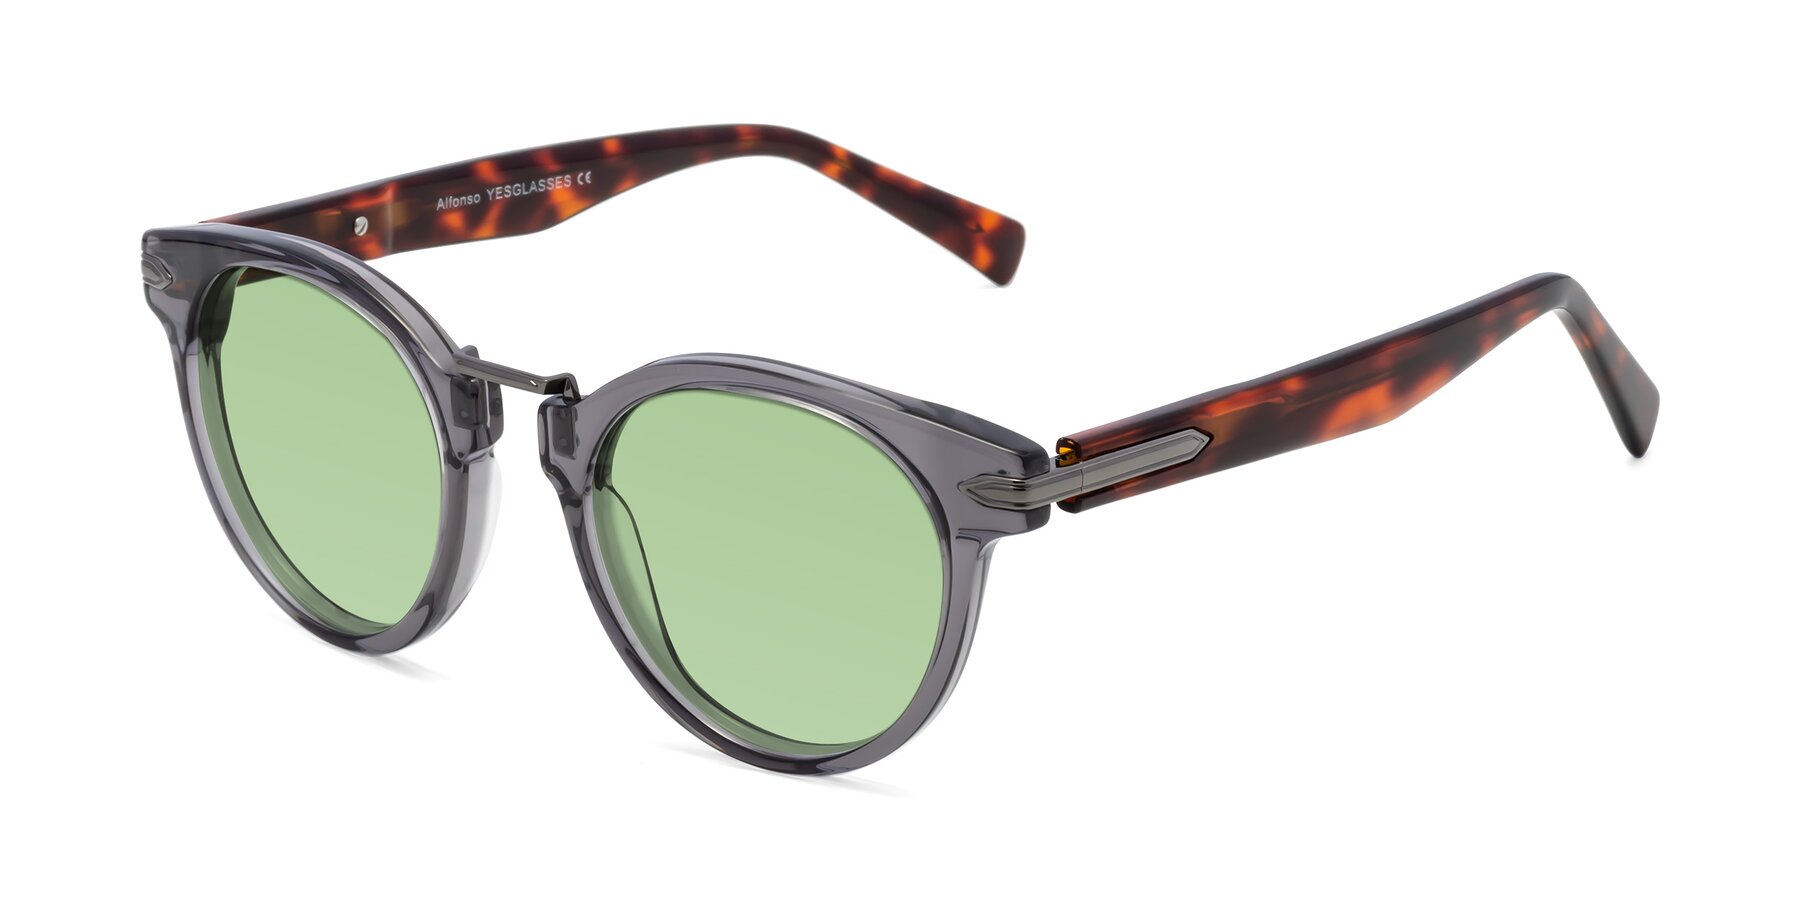 Angle of Alfonso in Gray /Tortoise with Medium Green Tinted Lenses